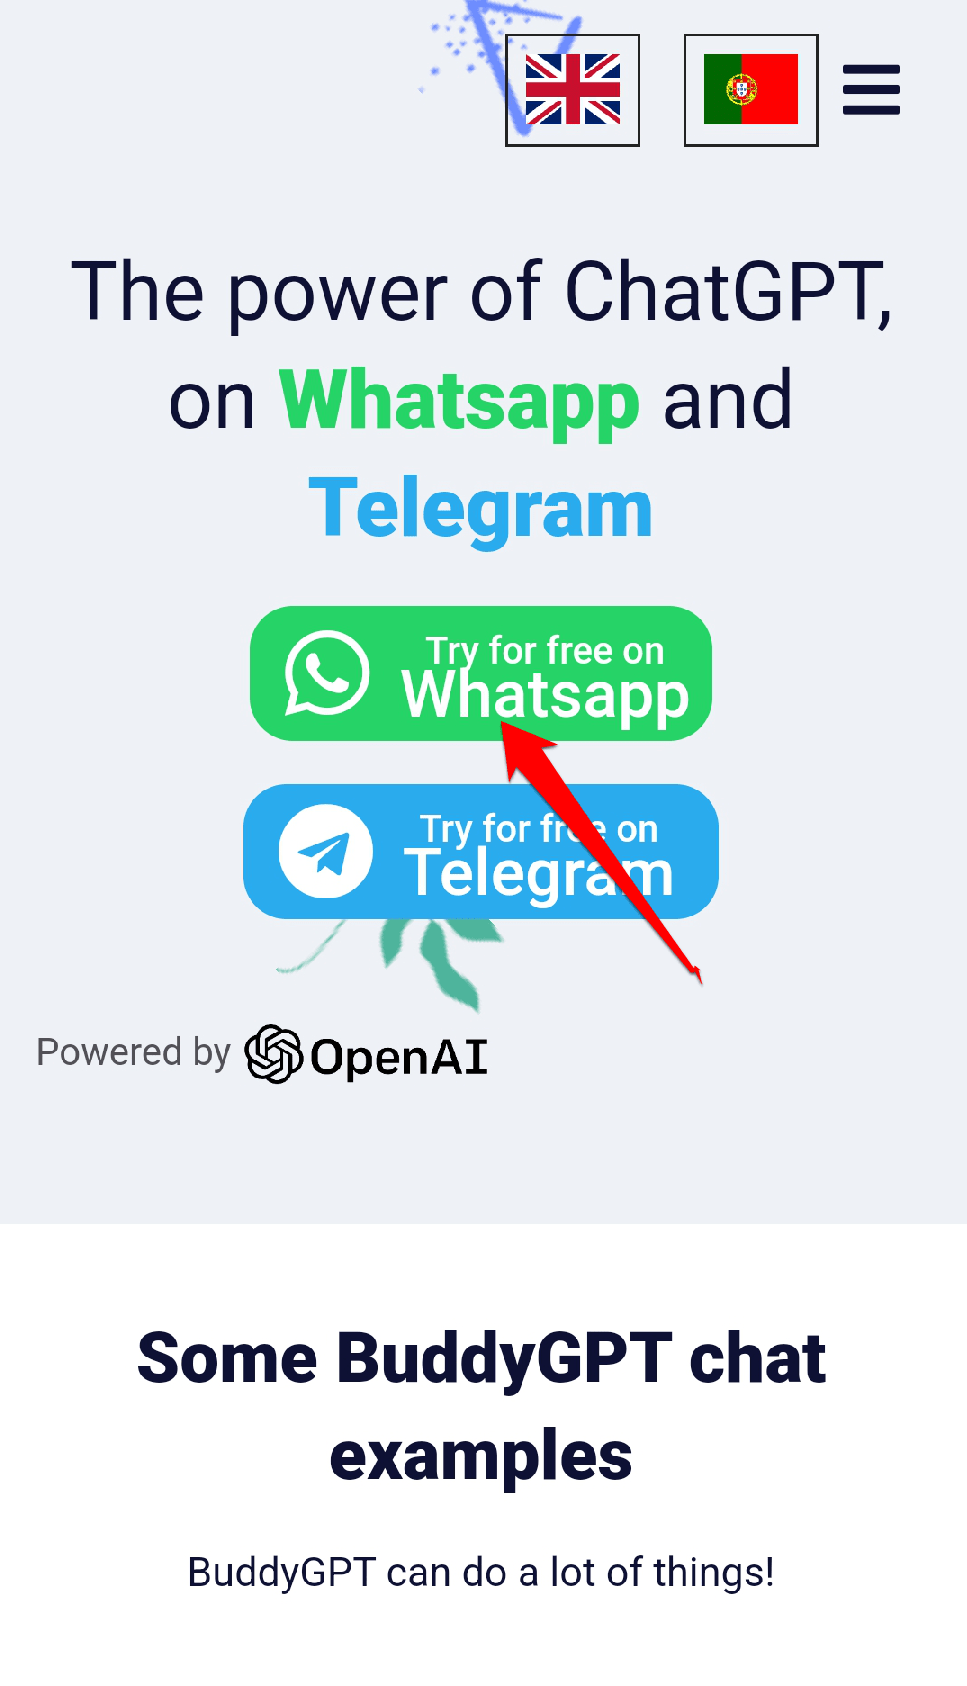 select "Try for free on WhatsApp."